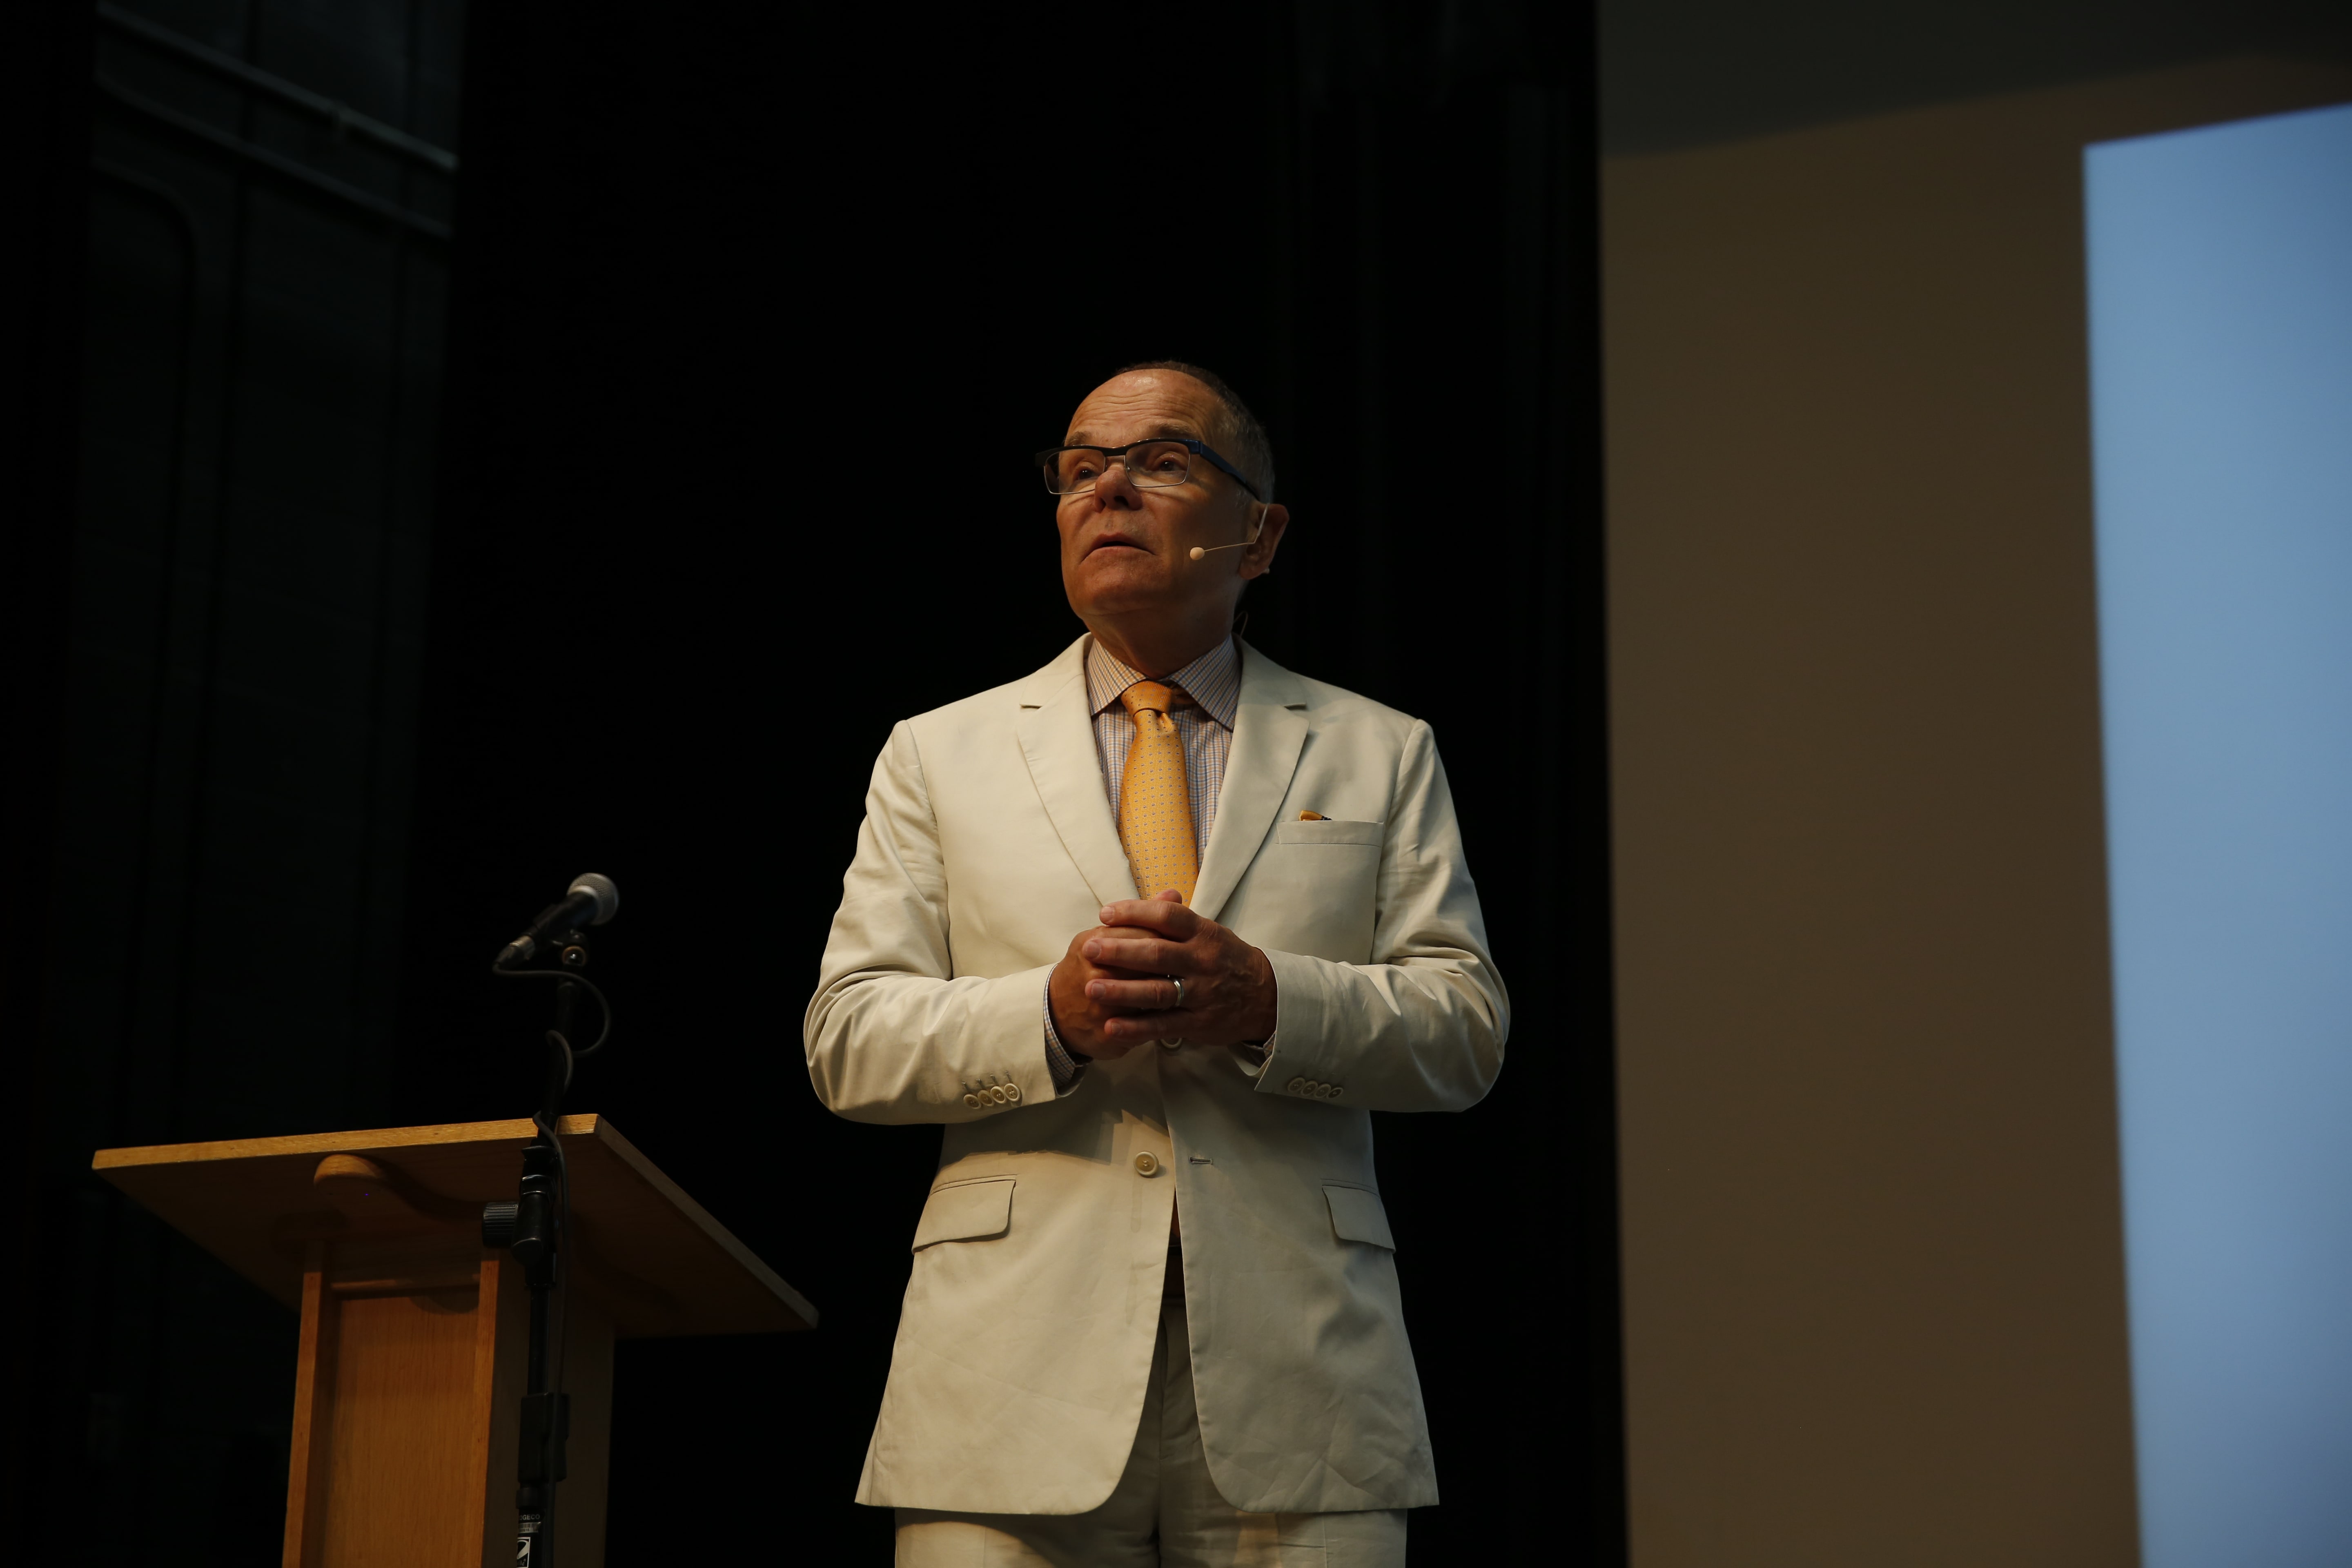 Don Tapscott speaking at a lecture